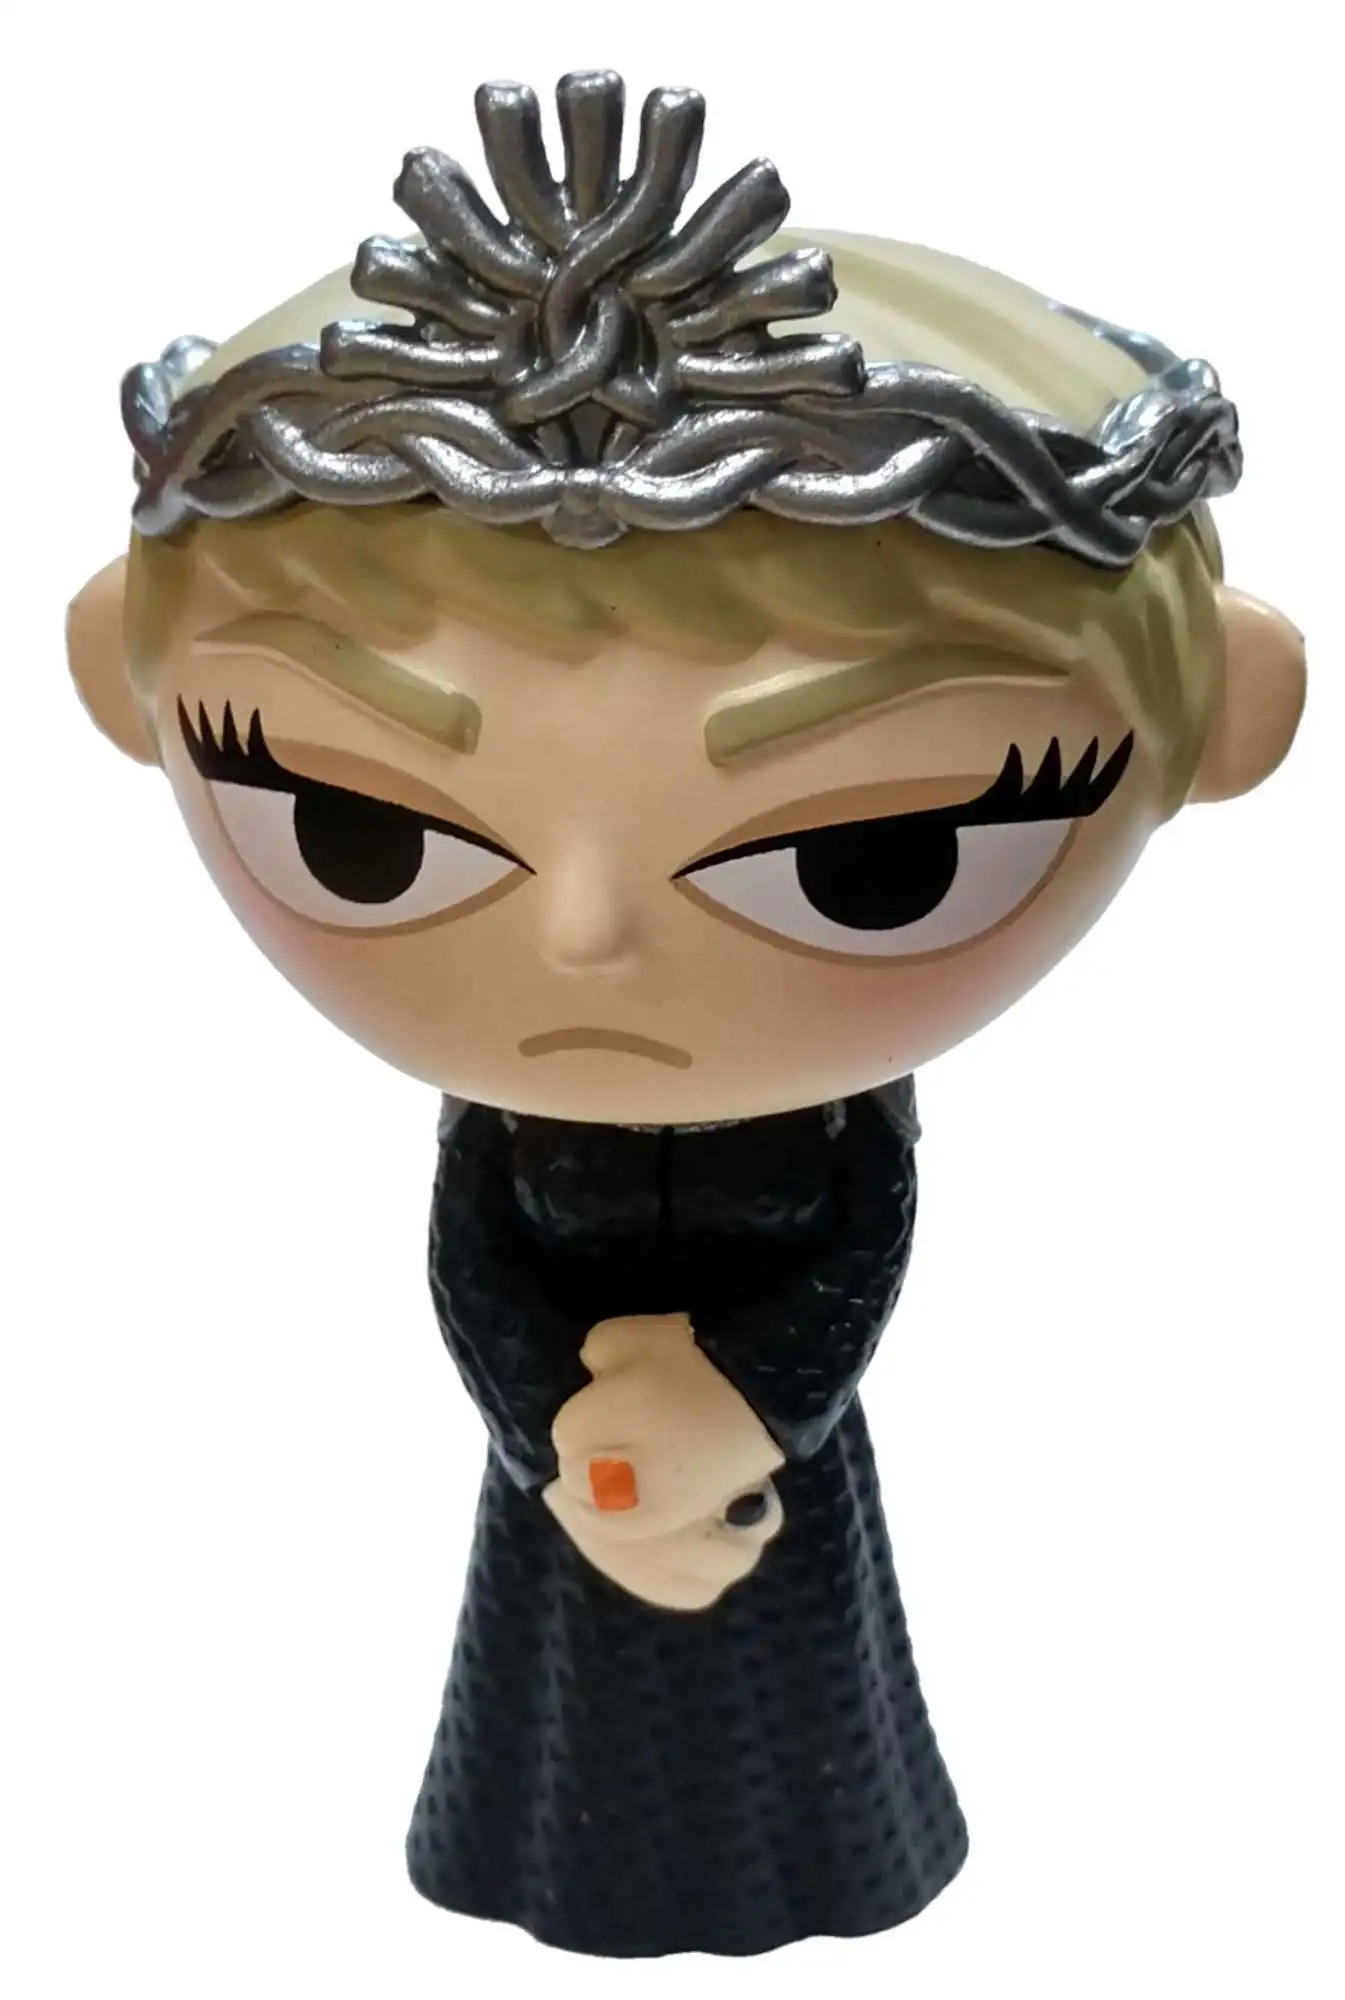 Game of Thrones Series 4 Funko Mystery Minis Vinyl Figures 1/12 Cersei Lannister 